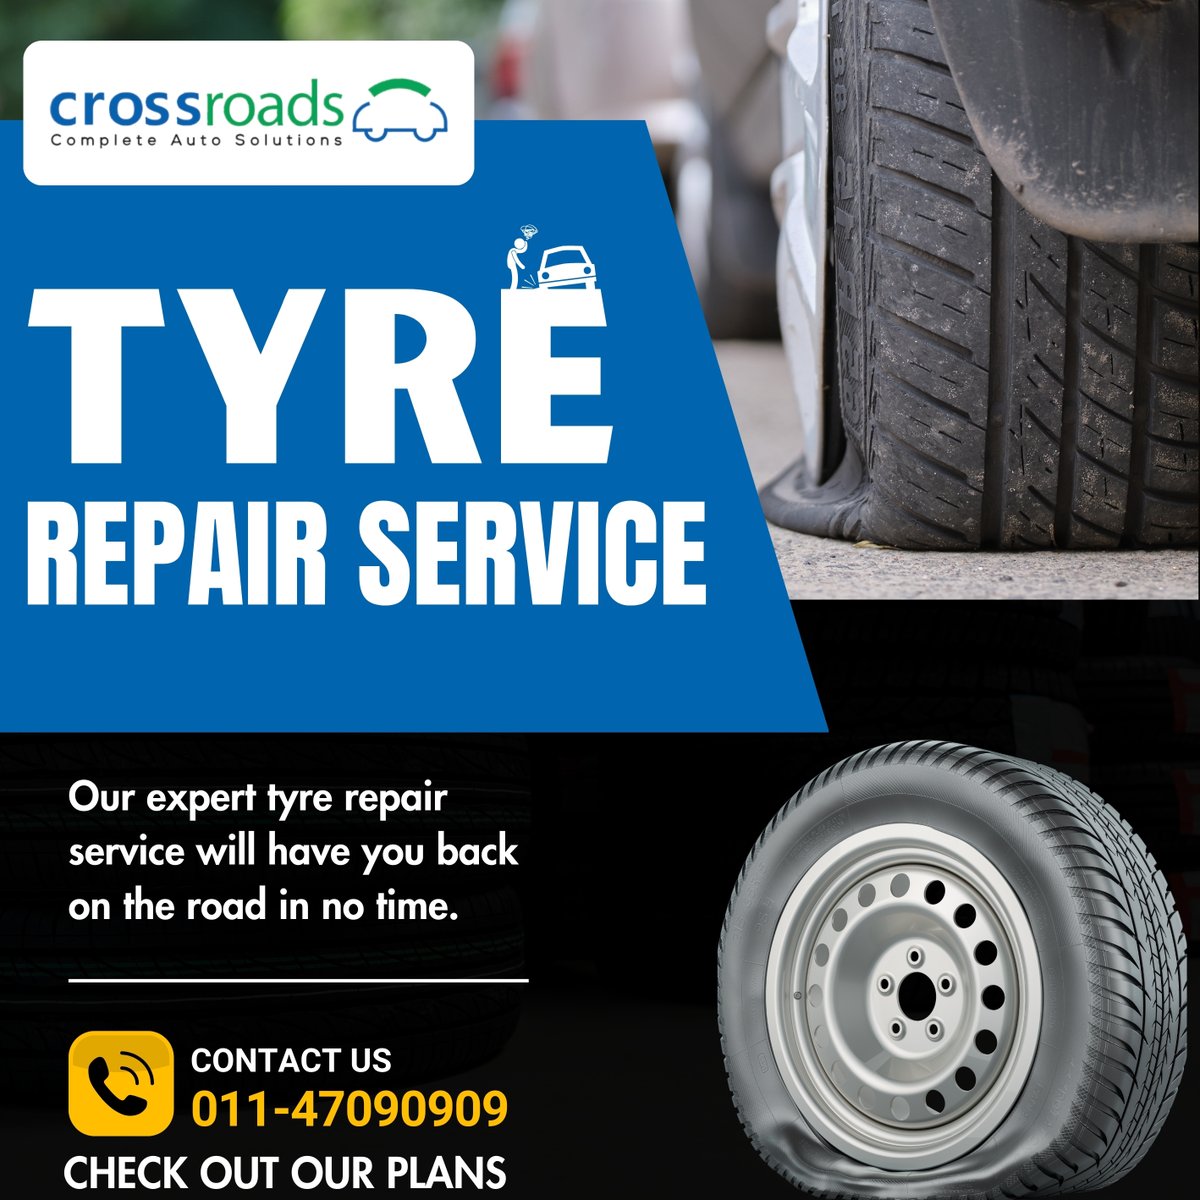 Our skilled tyre repair service will quickly fix your flat tyre.🛞🧰

FOR MORE ENQUIRY CONTACT US HERE:
📞 : 011-47090909
🌐 : crossroadshelpline.com
📩 : care@crossroadshelpline.com

#roadsideassistance #24x7roadside